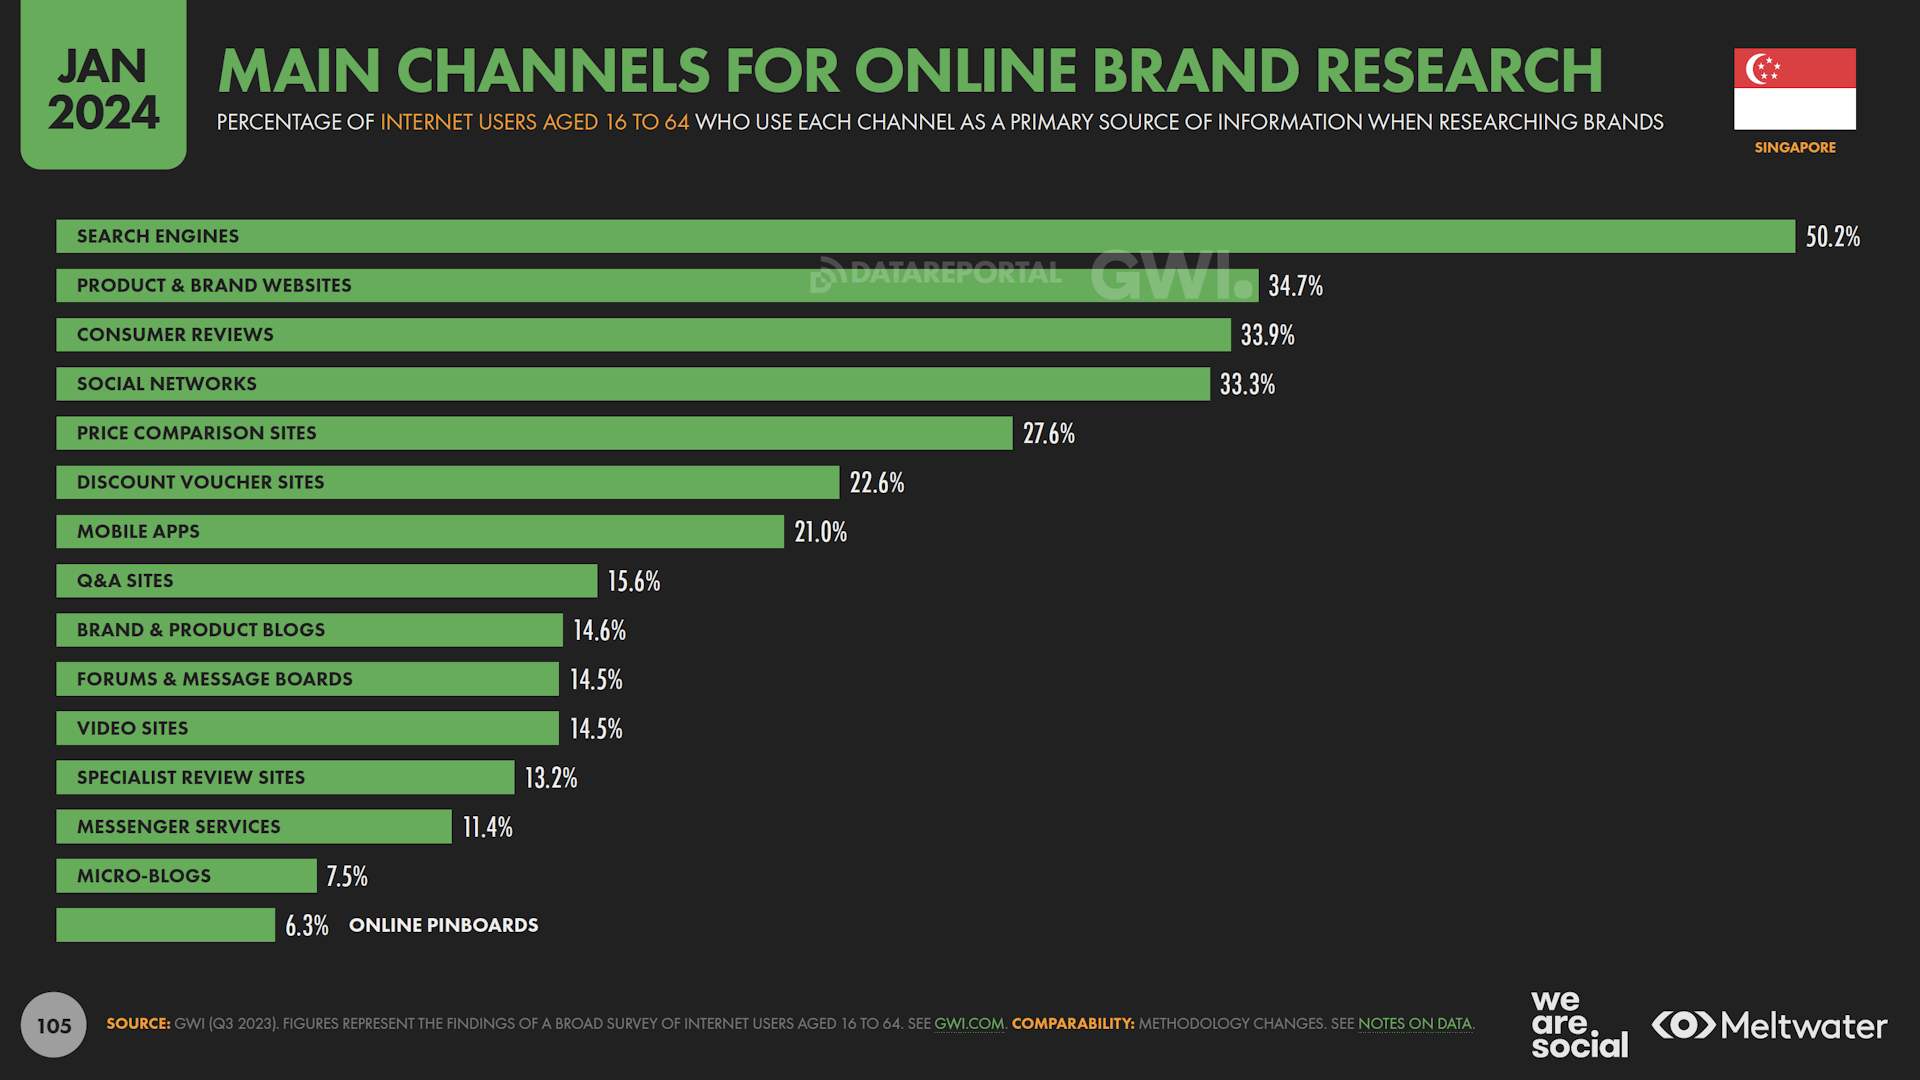 Main channels for online branded research based on Global Digital Report 2024 for Singapore